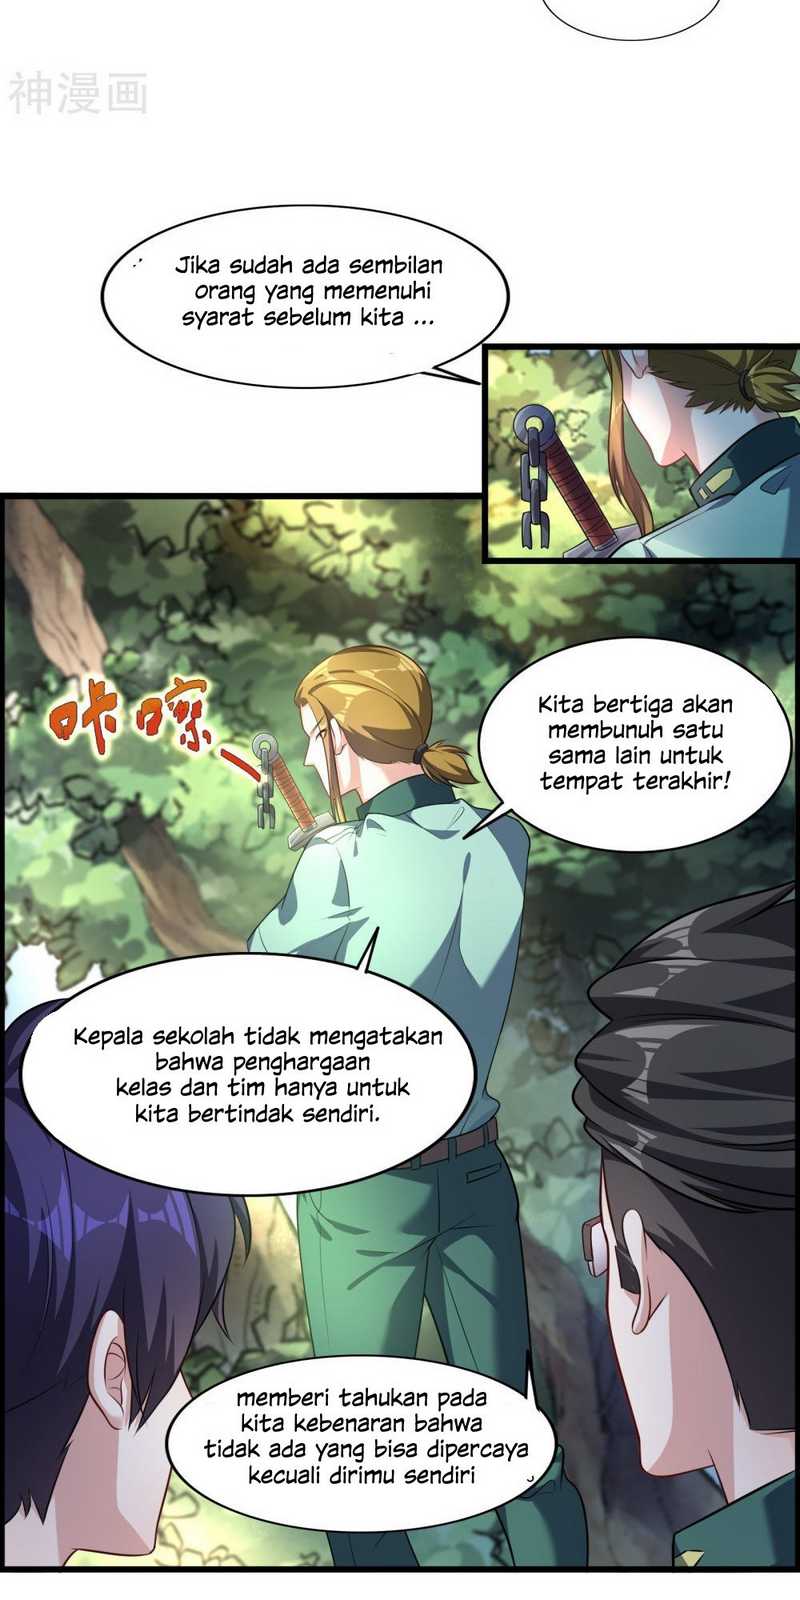 Devil Warlord Chapter 7